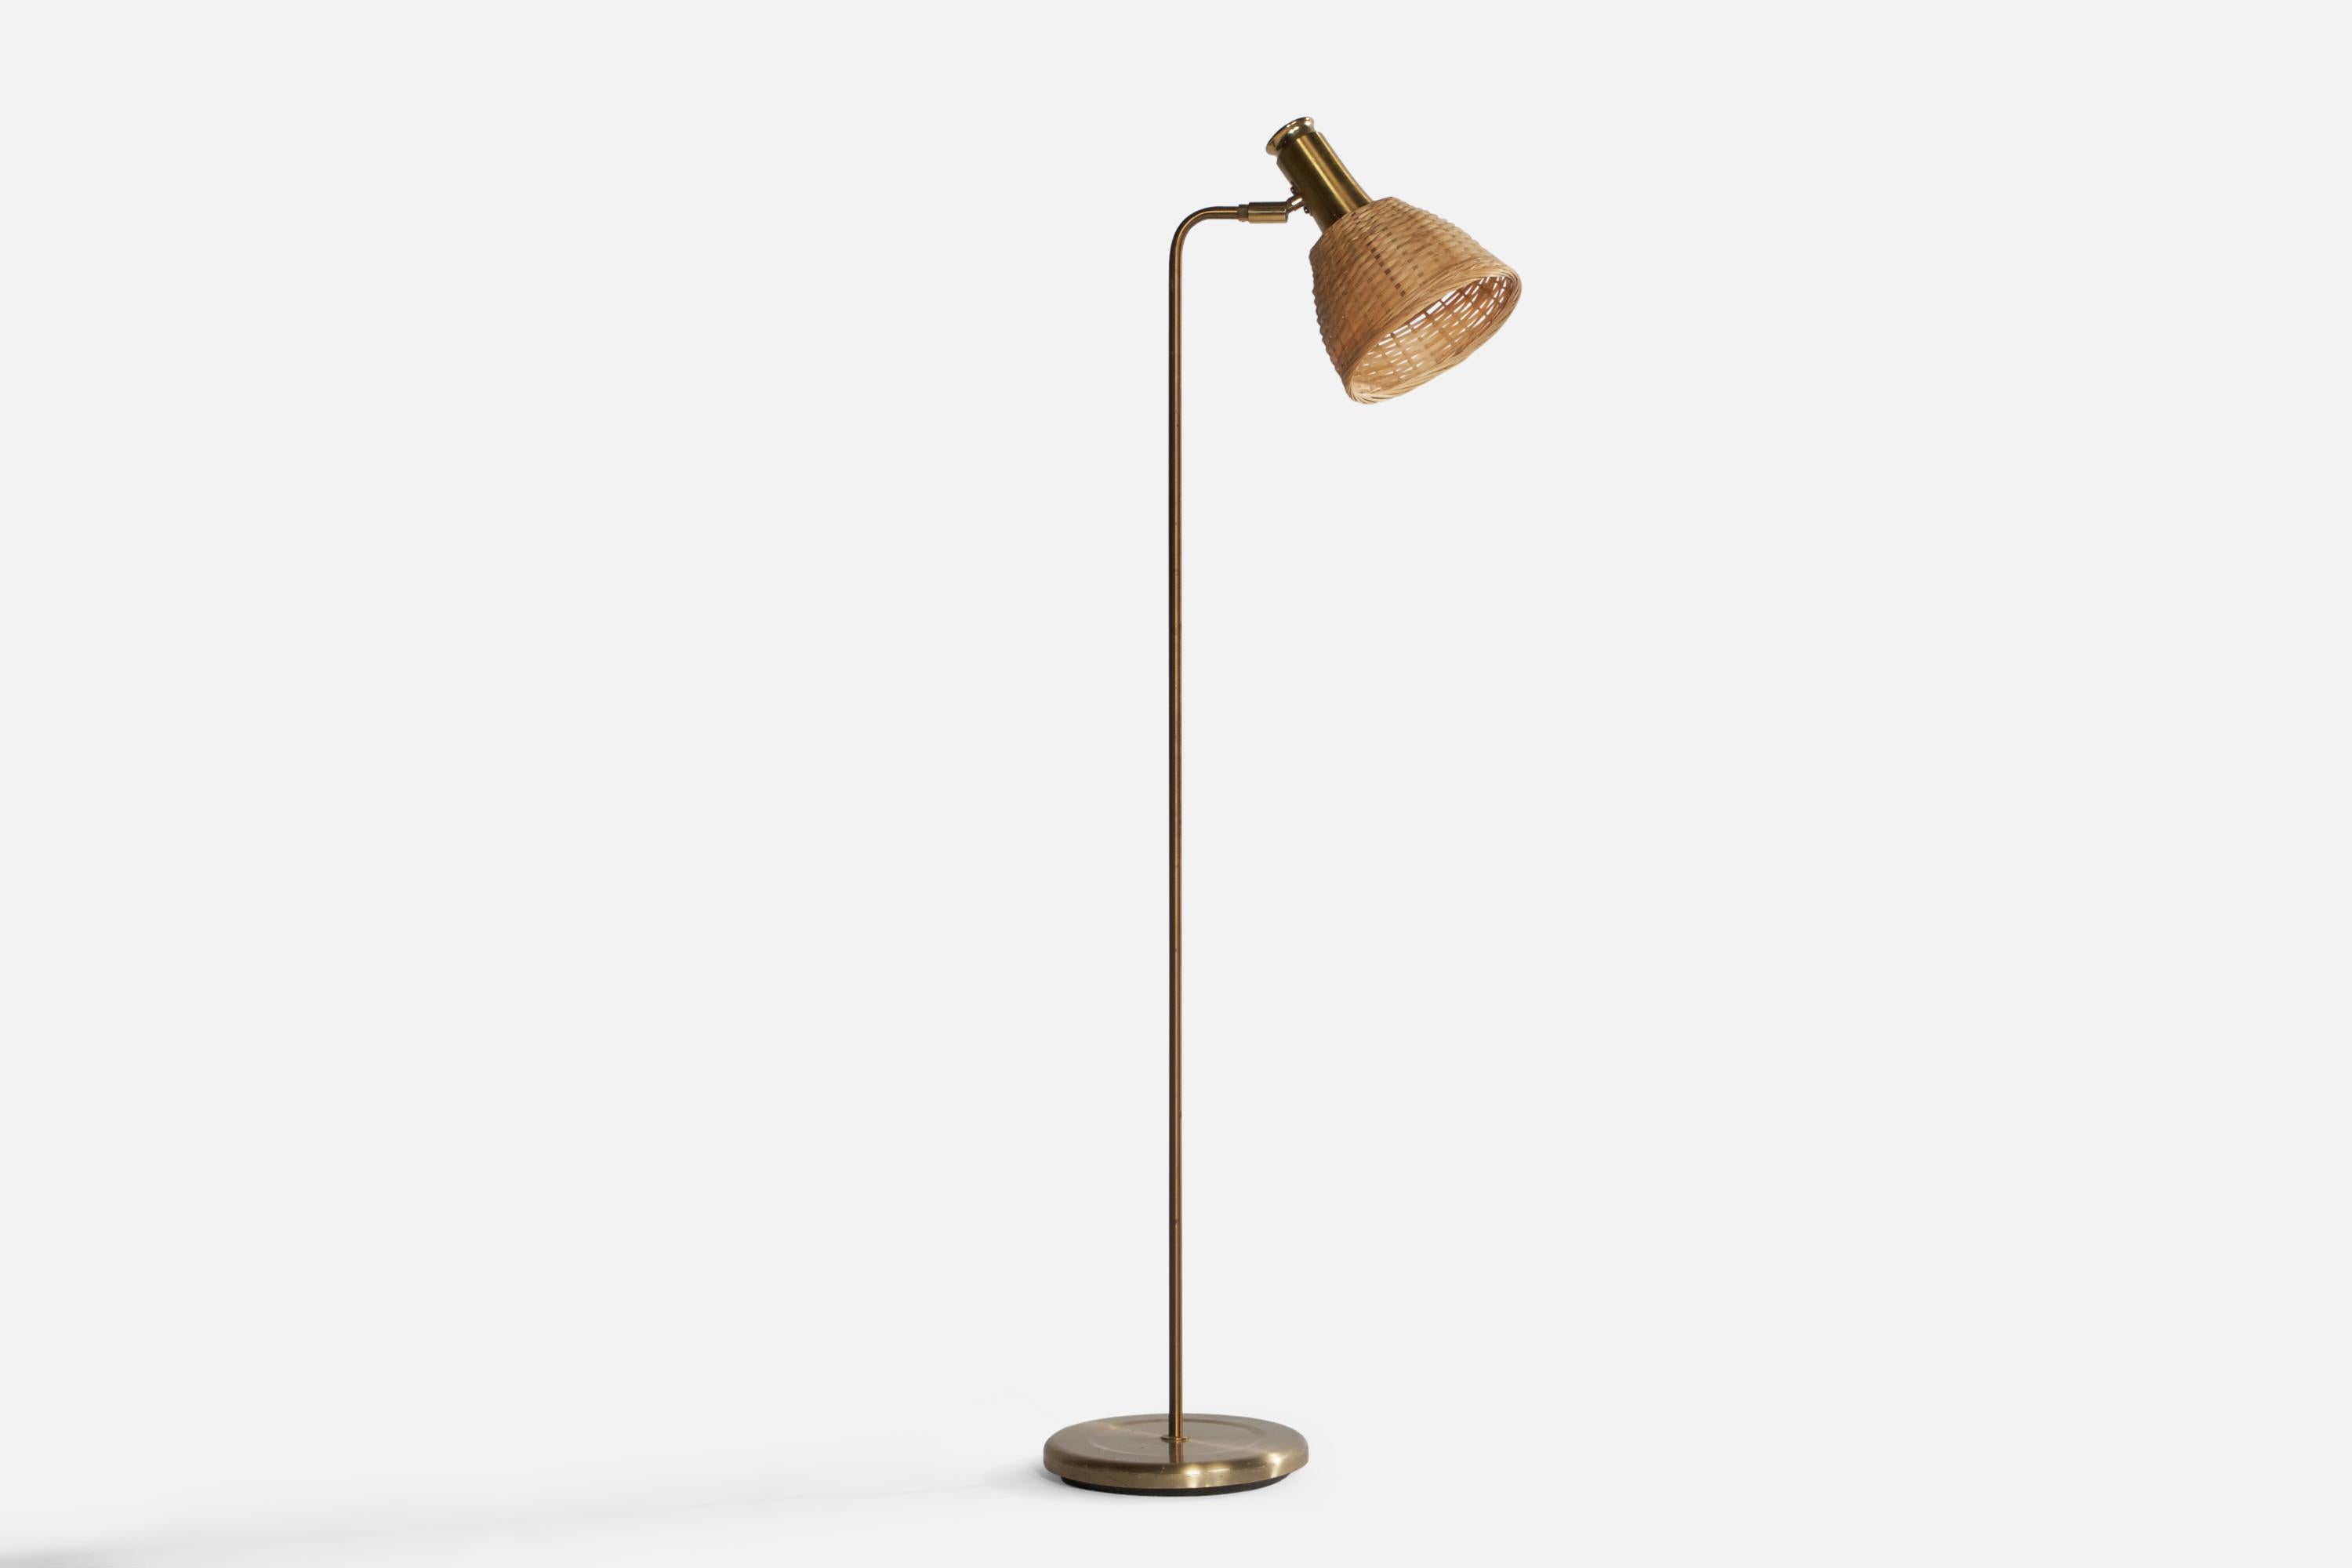 An adjustable brass and rattan floor lamp designed and produced in Sweden, c. 1960s.

Overall Dimensions (inches): 48” H x 9.5” W x 18” D. Stated dimensions include shade.
Dimensions  variable based on position of light.
Bulb Specifications: E-26